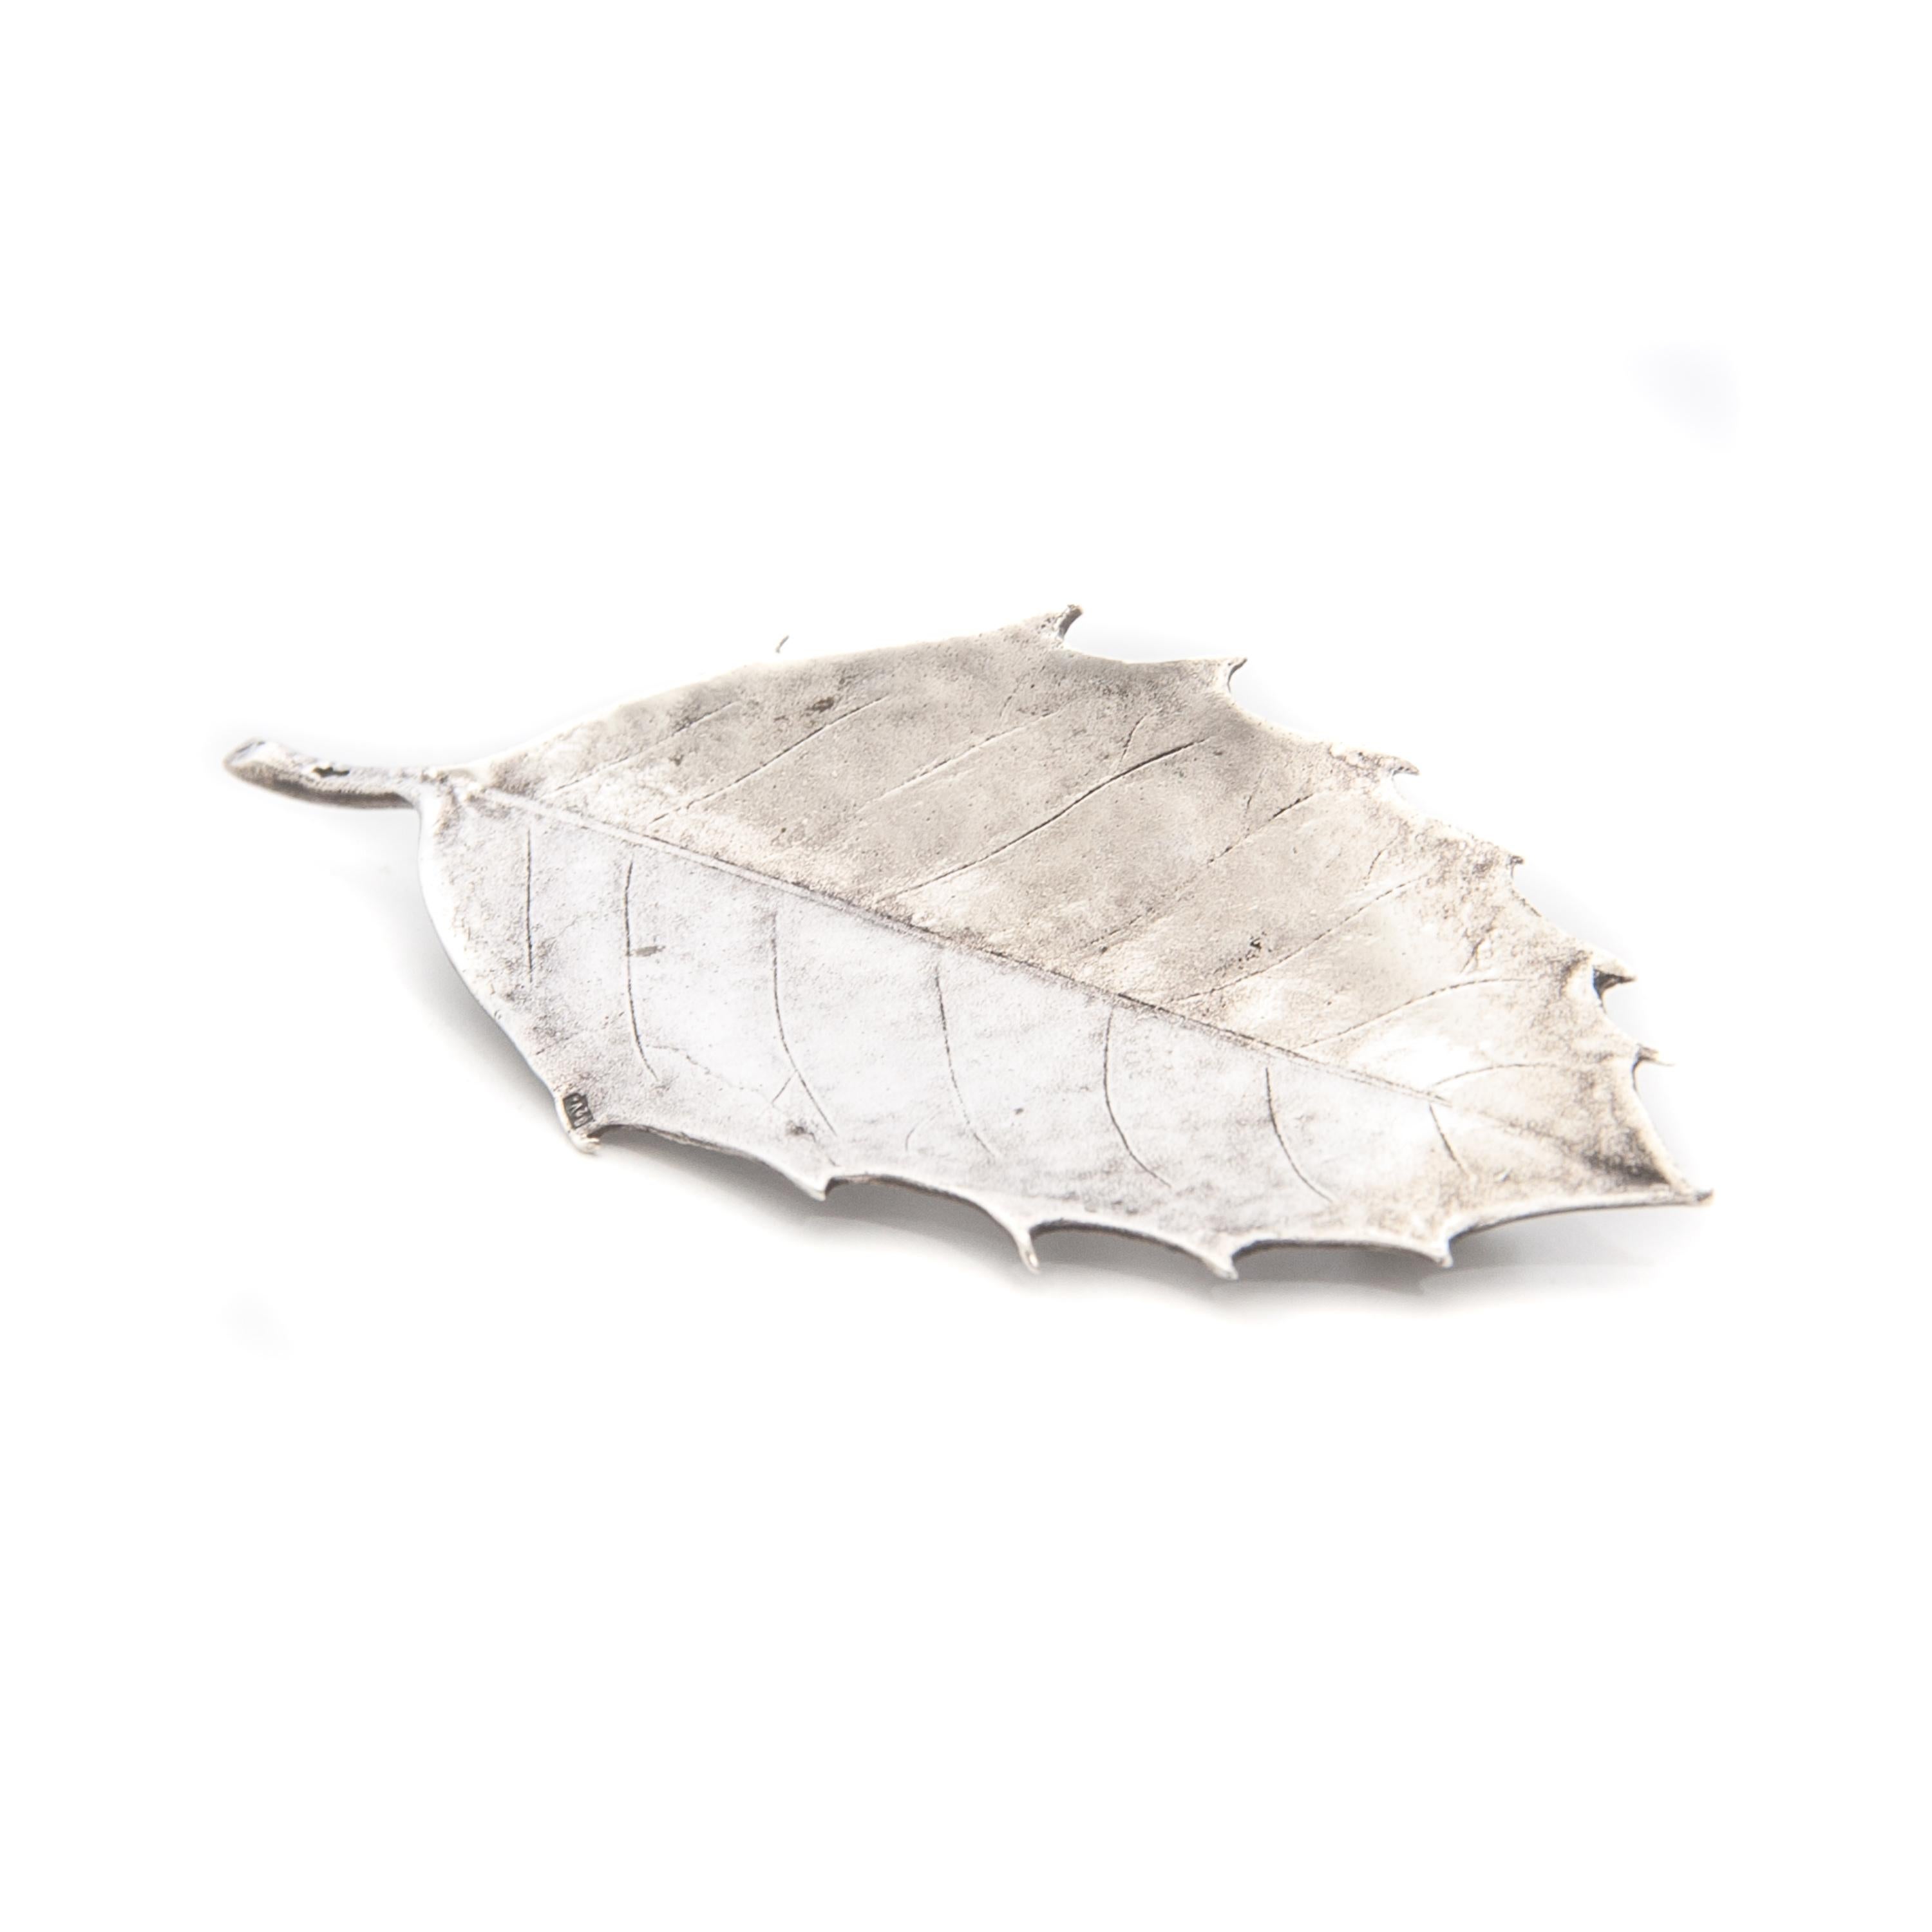 Vintage silver holly leaf prickly brooch. Known for its shiny evergreen leaves and bright red berries, holly trees are a naturally festive decoration seen throughout the Christmas season. The brooch is made of polished silver and beautifully